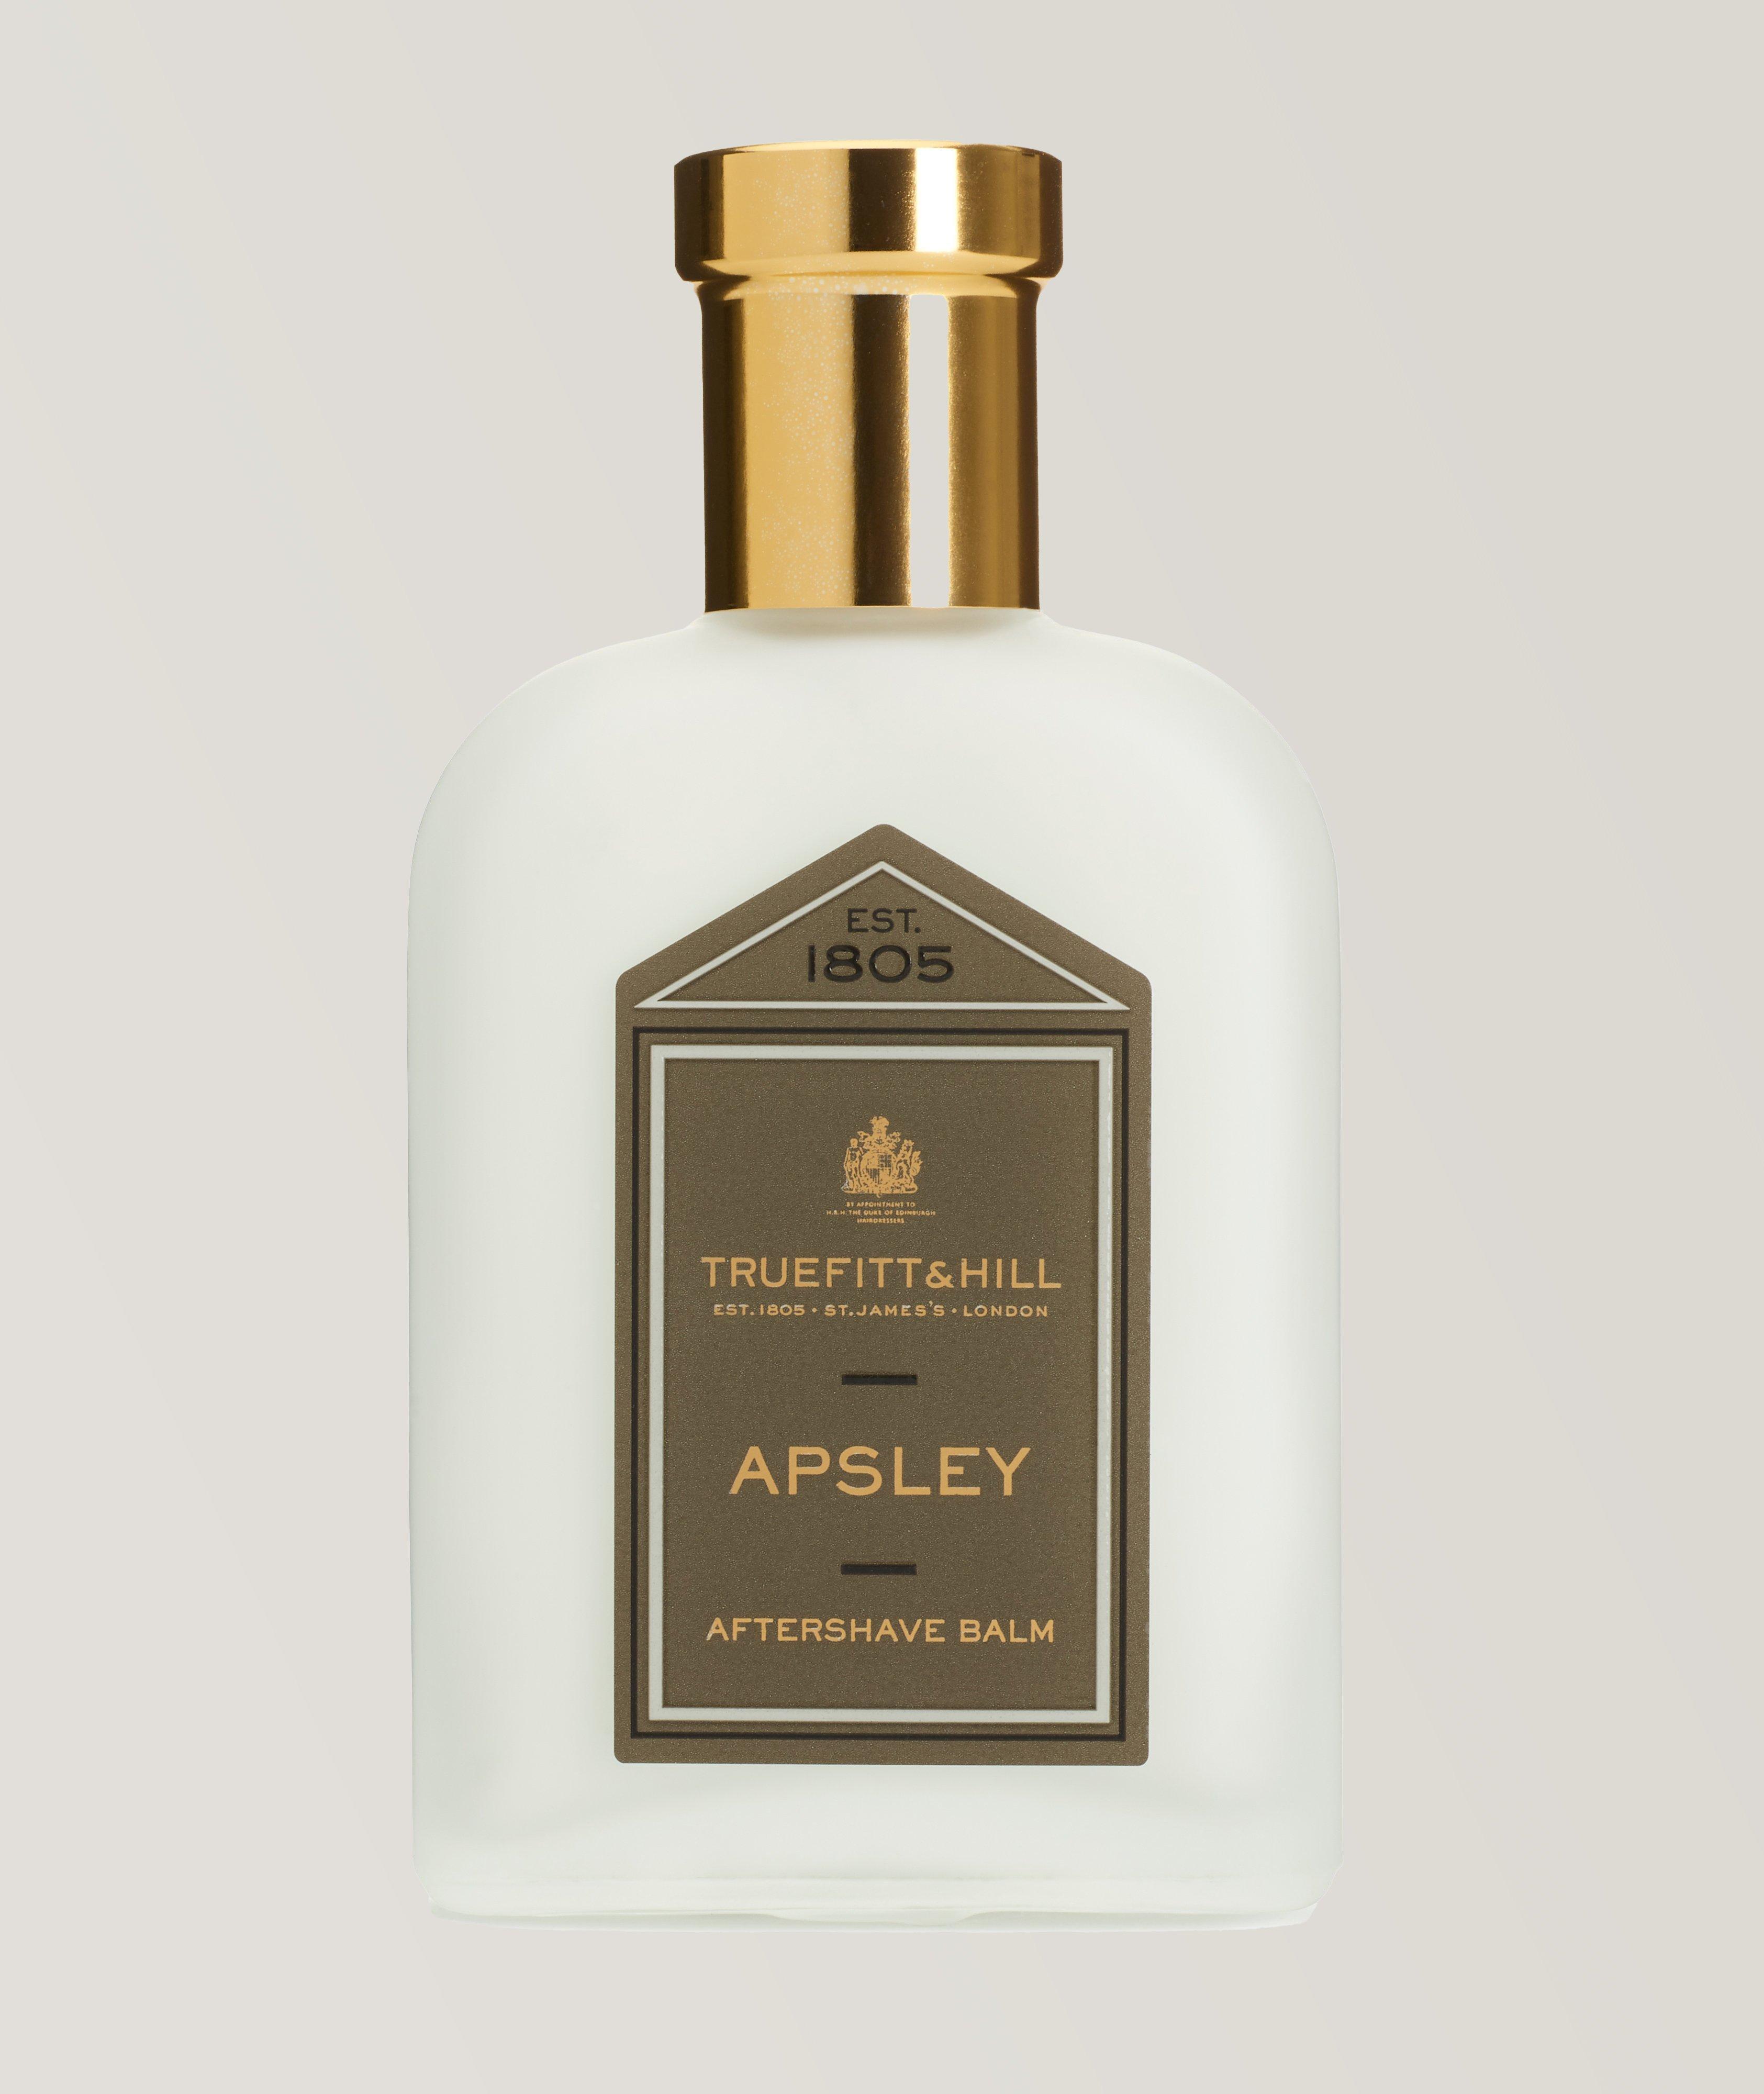 Apsley Aftershave Balm